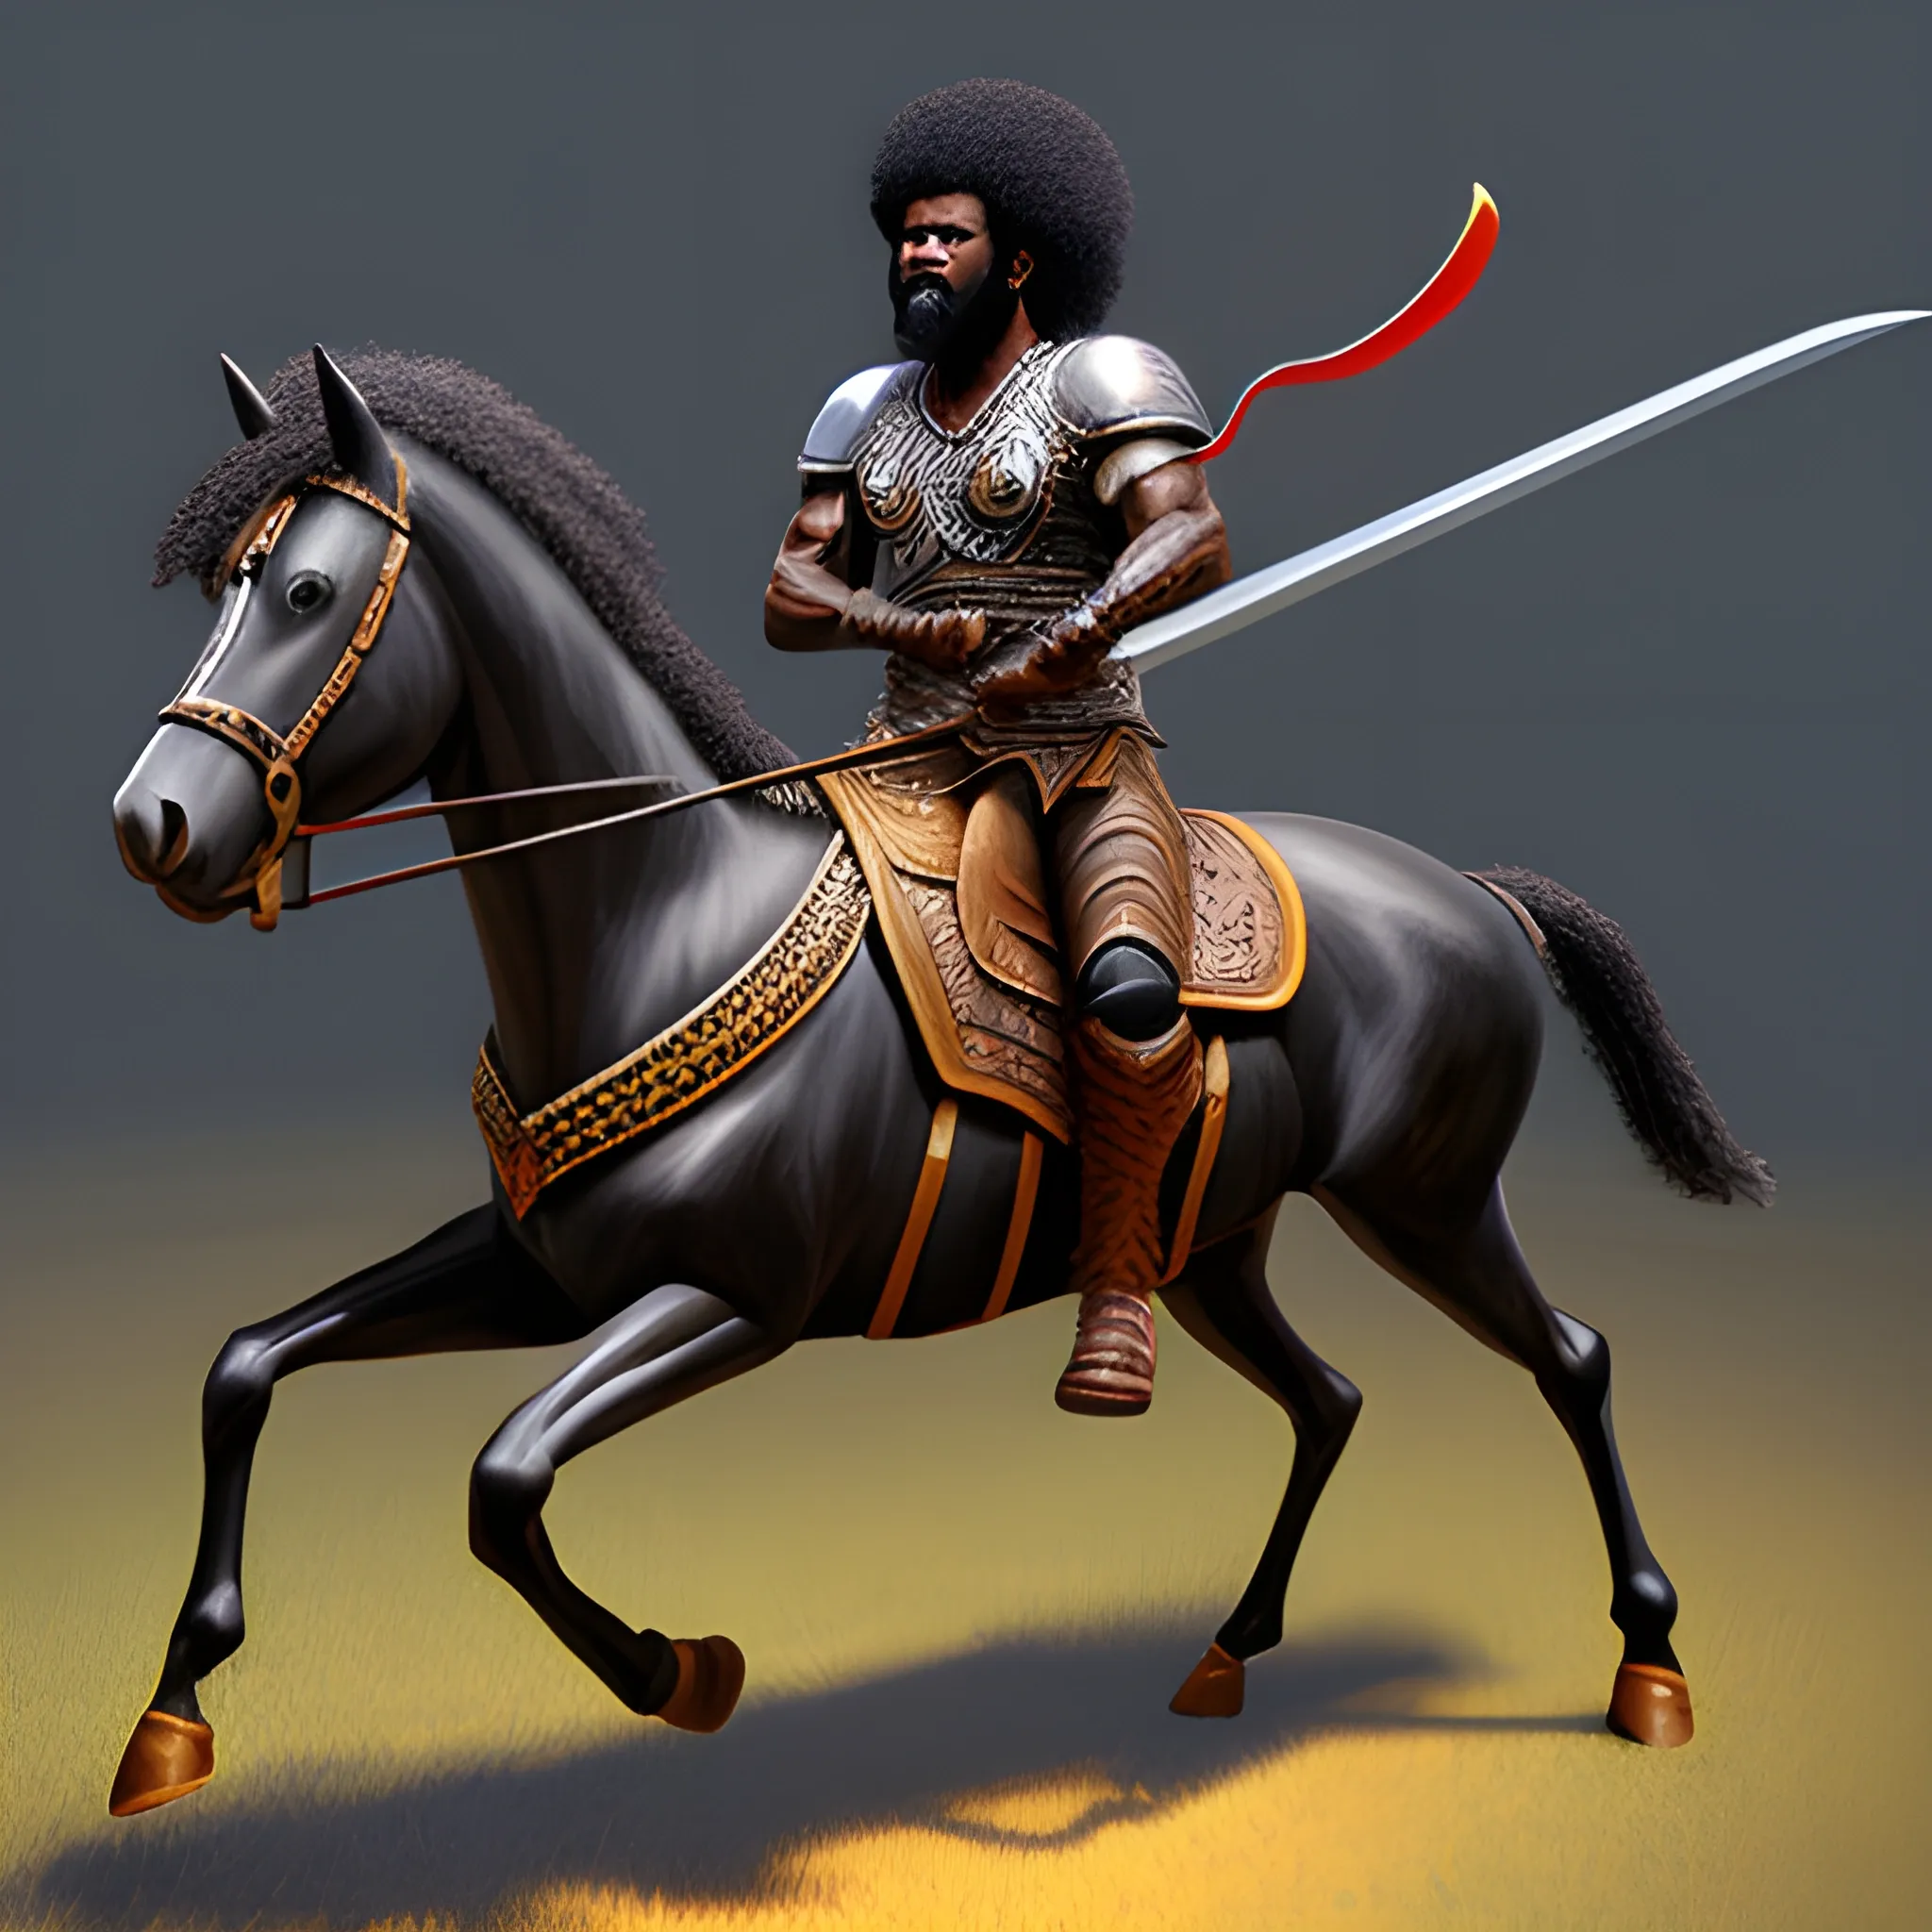 realistic black afro warrior with his sword drawn riding a black horse, 3D., Cartoon, Oil Painting